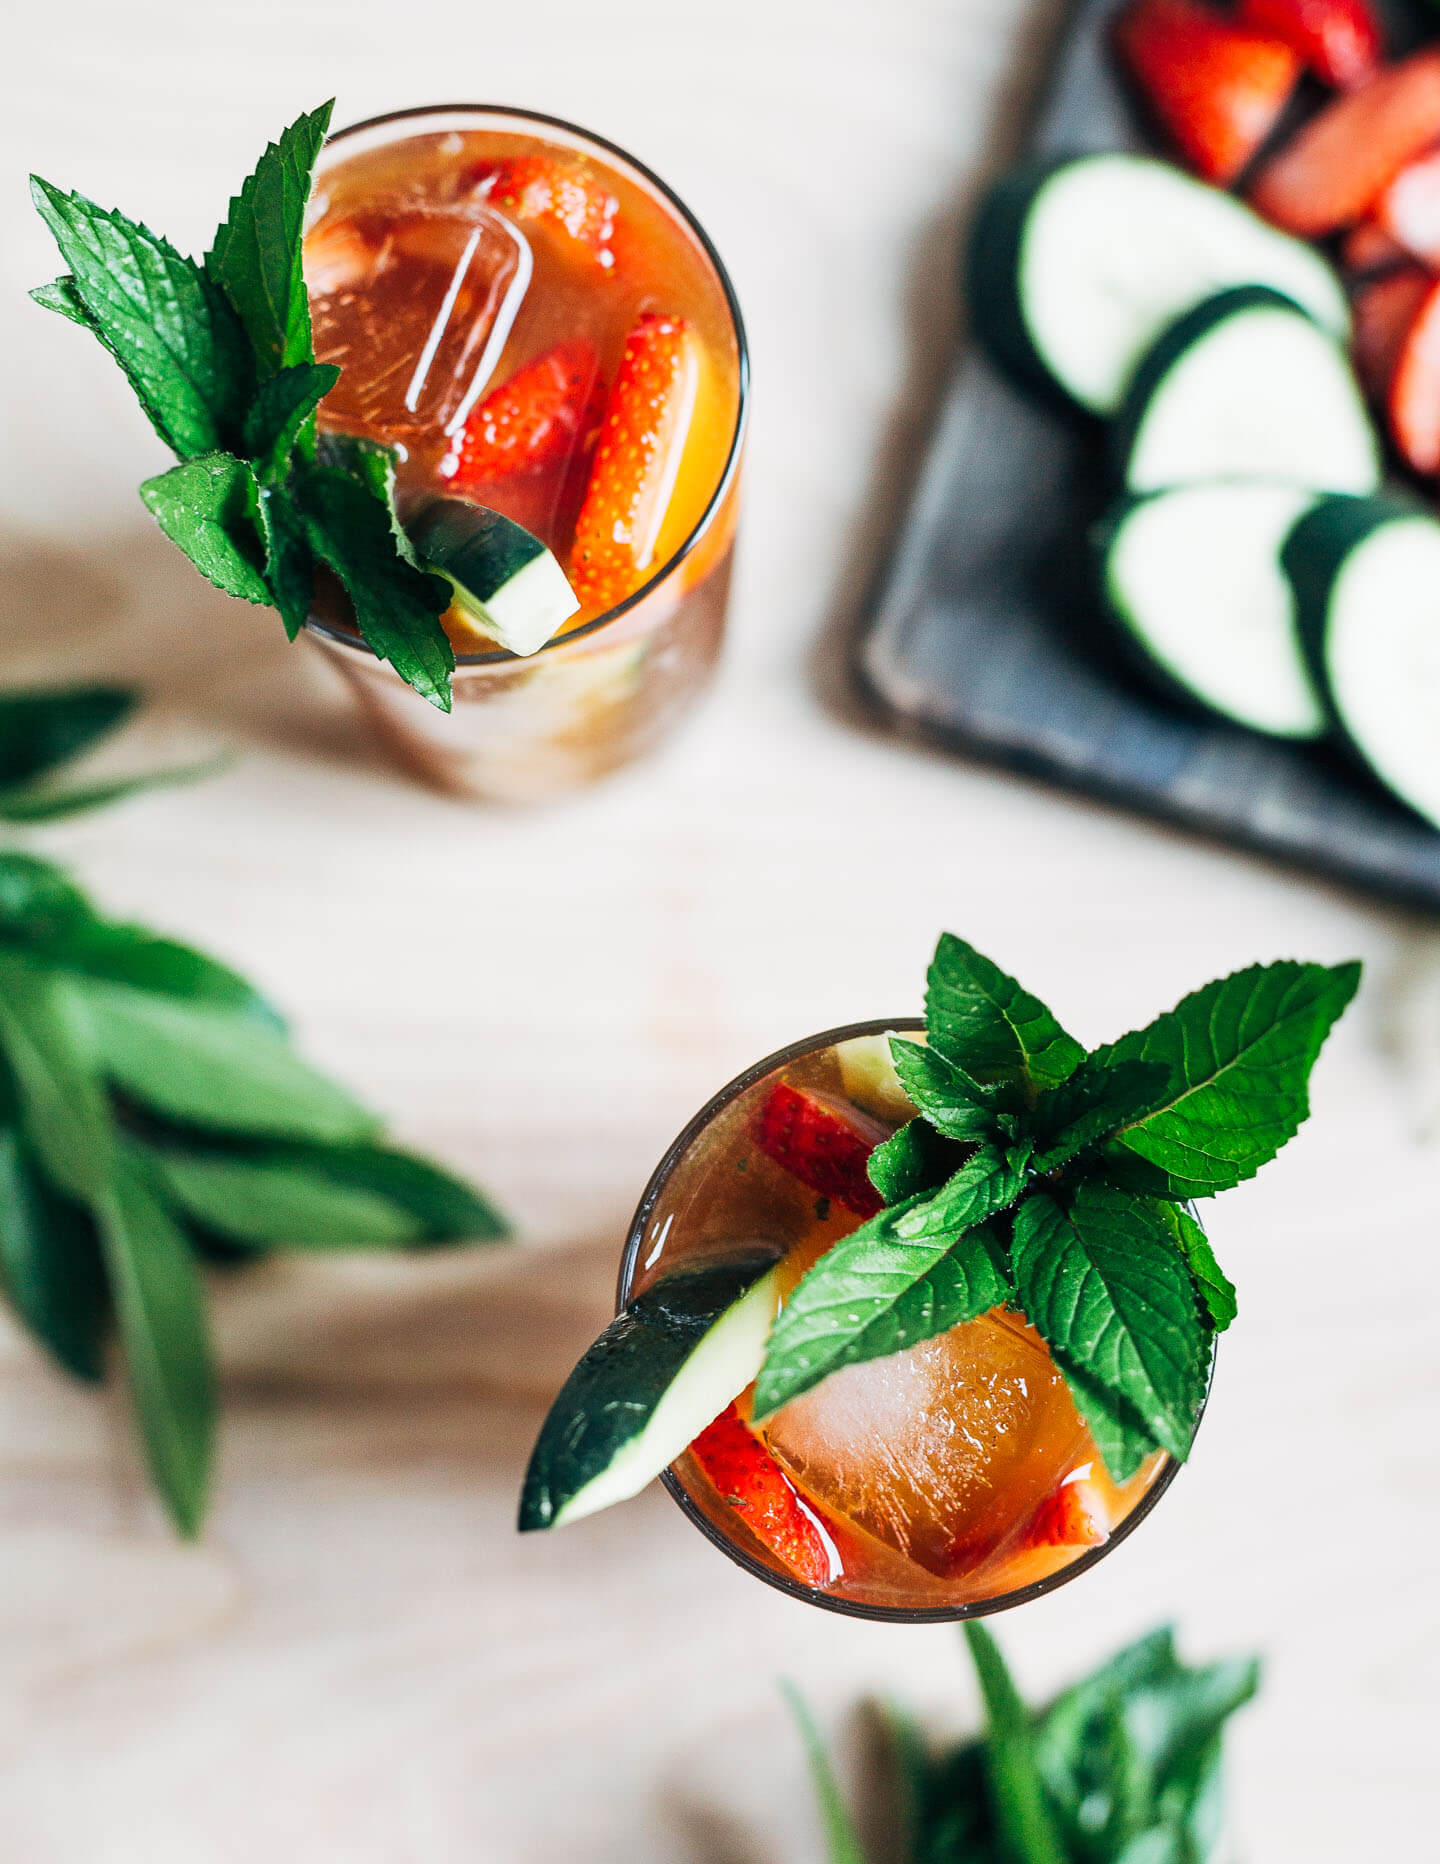 Classic Pimm's cup cocktails for your summer celebrations. Made with strawberries, cucumbers, tarragon, mint, and fresh lime, these Pimm's cups are the perfect lower-alcohol summer sip.